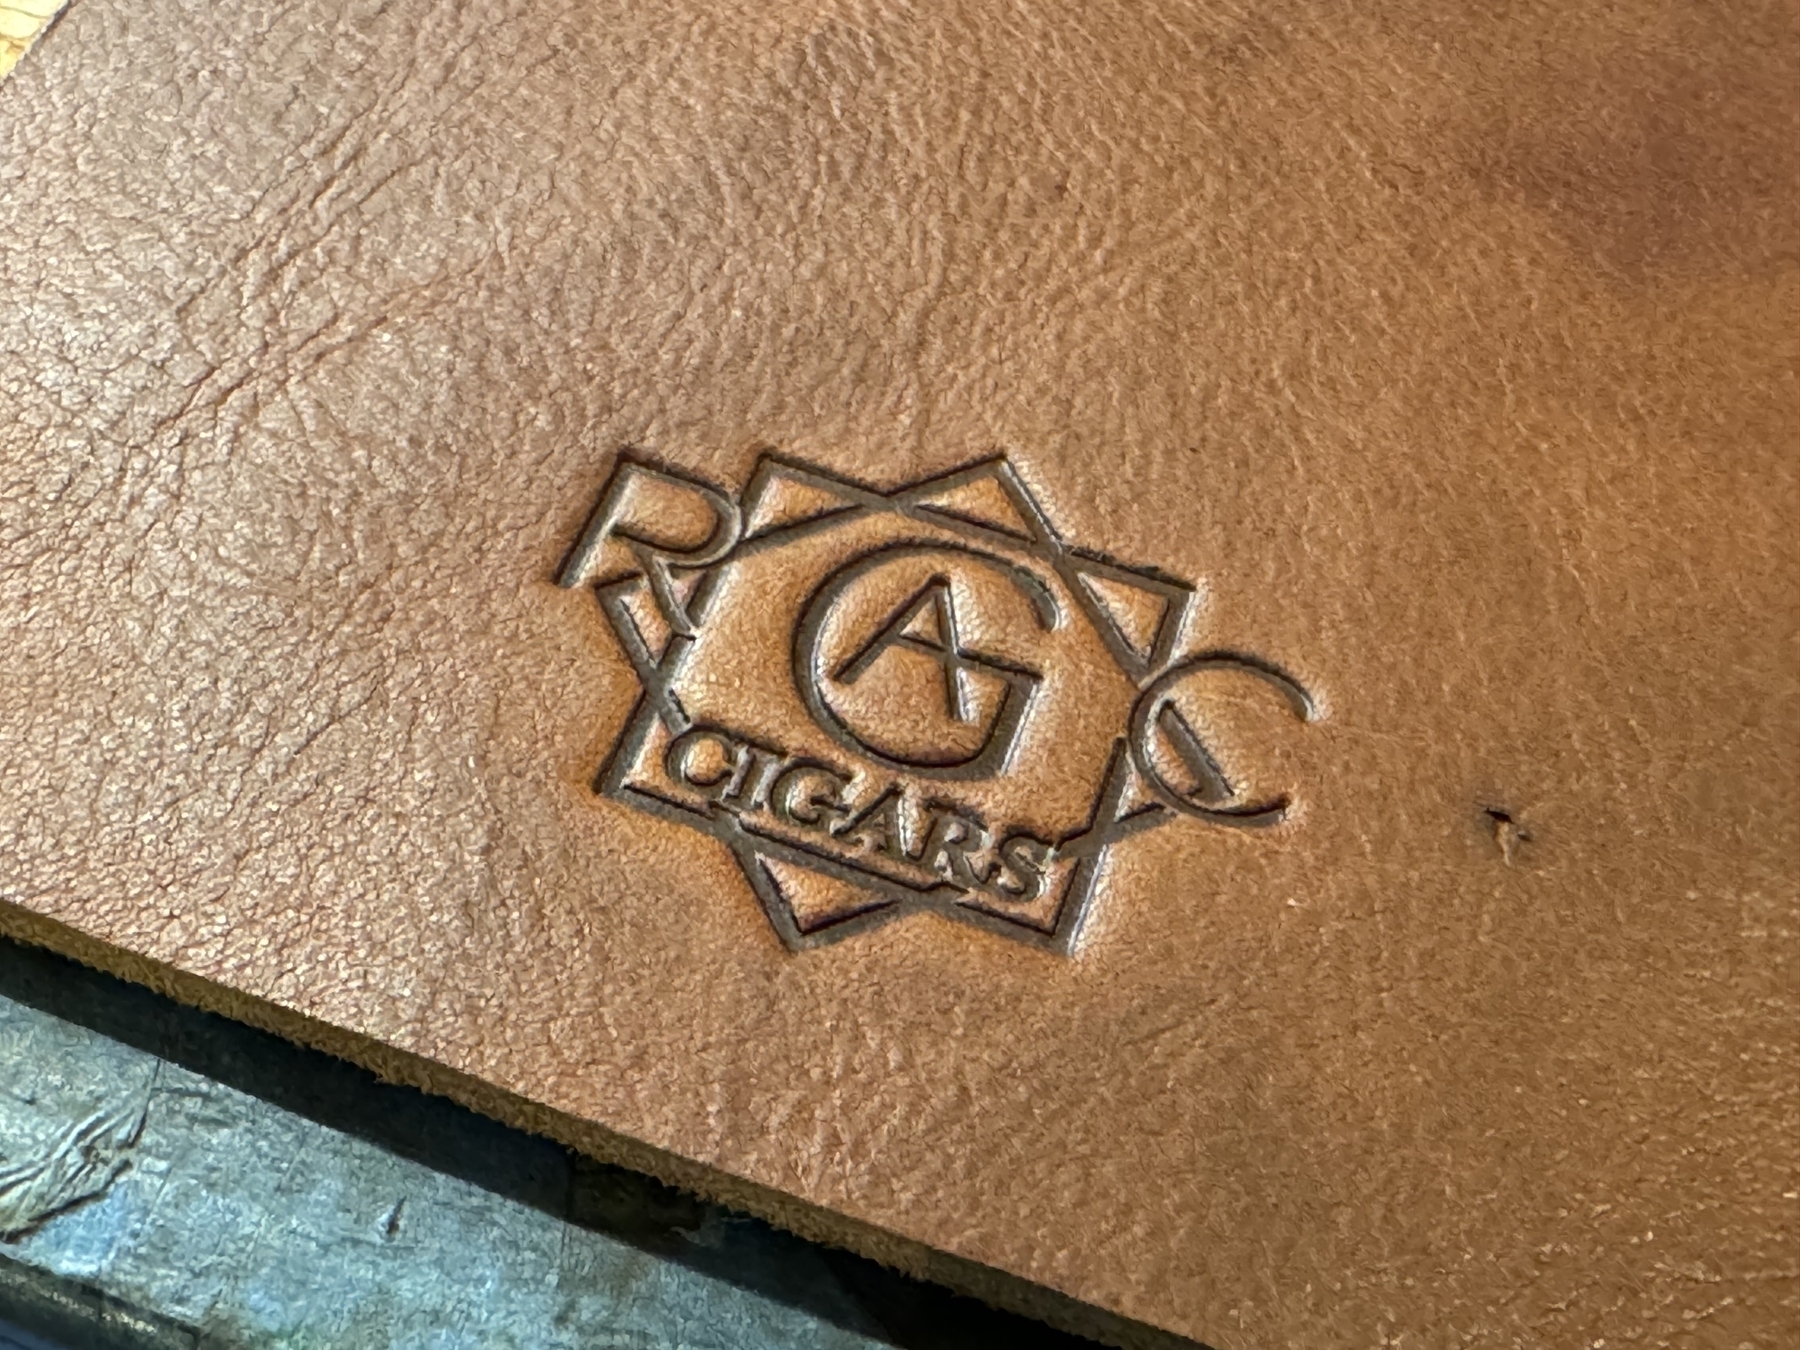 A piece of leather features an embossed logo with a geometric design and the text "CIGARS".